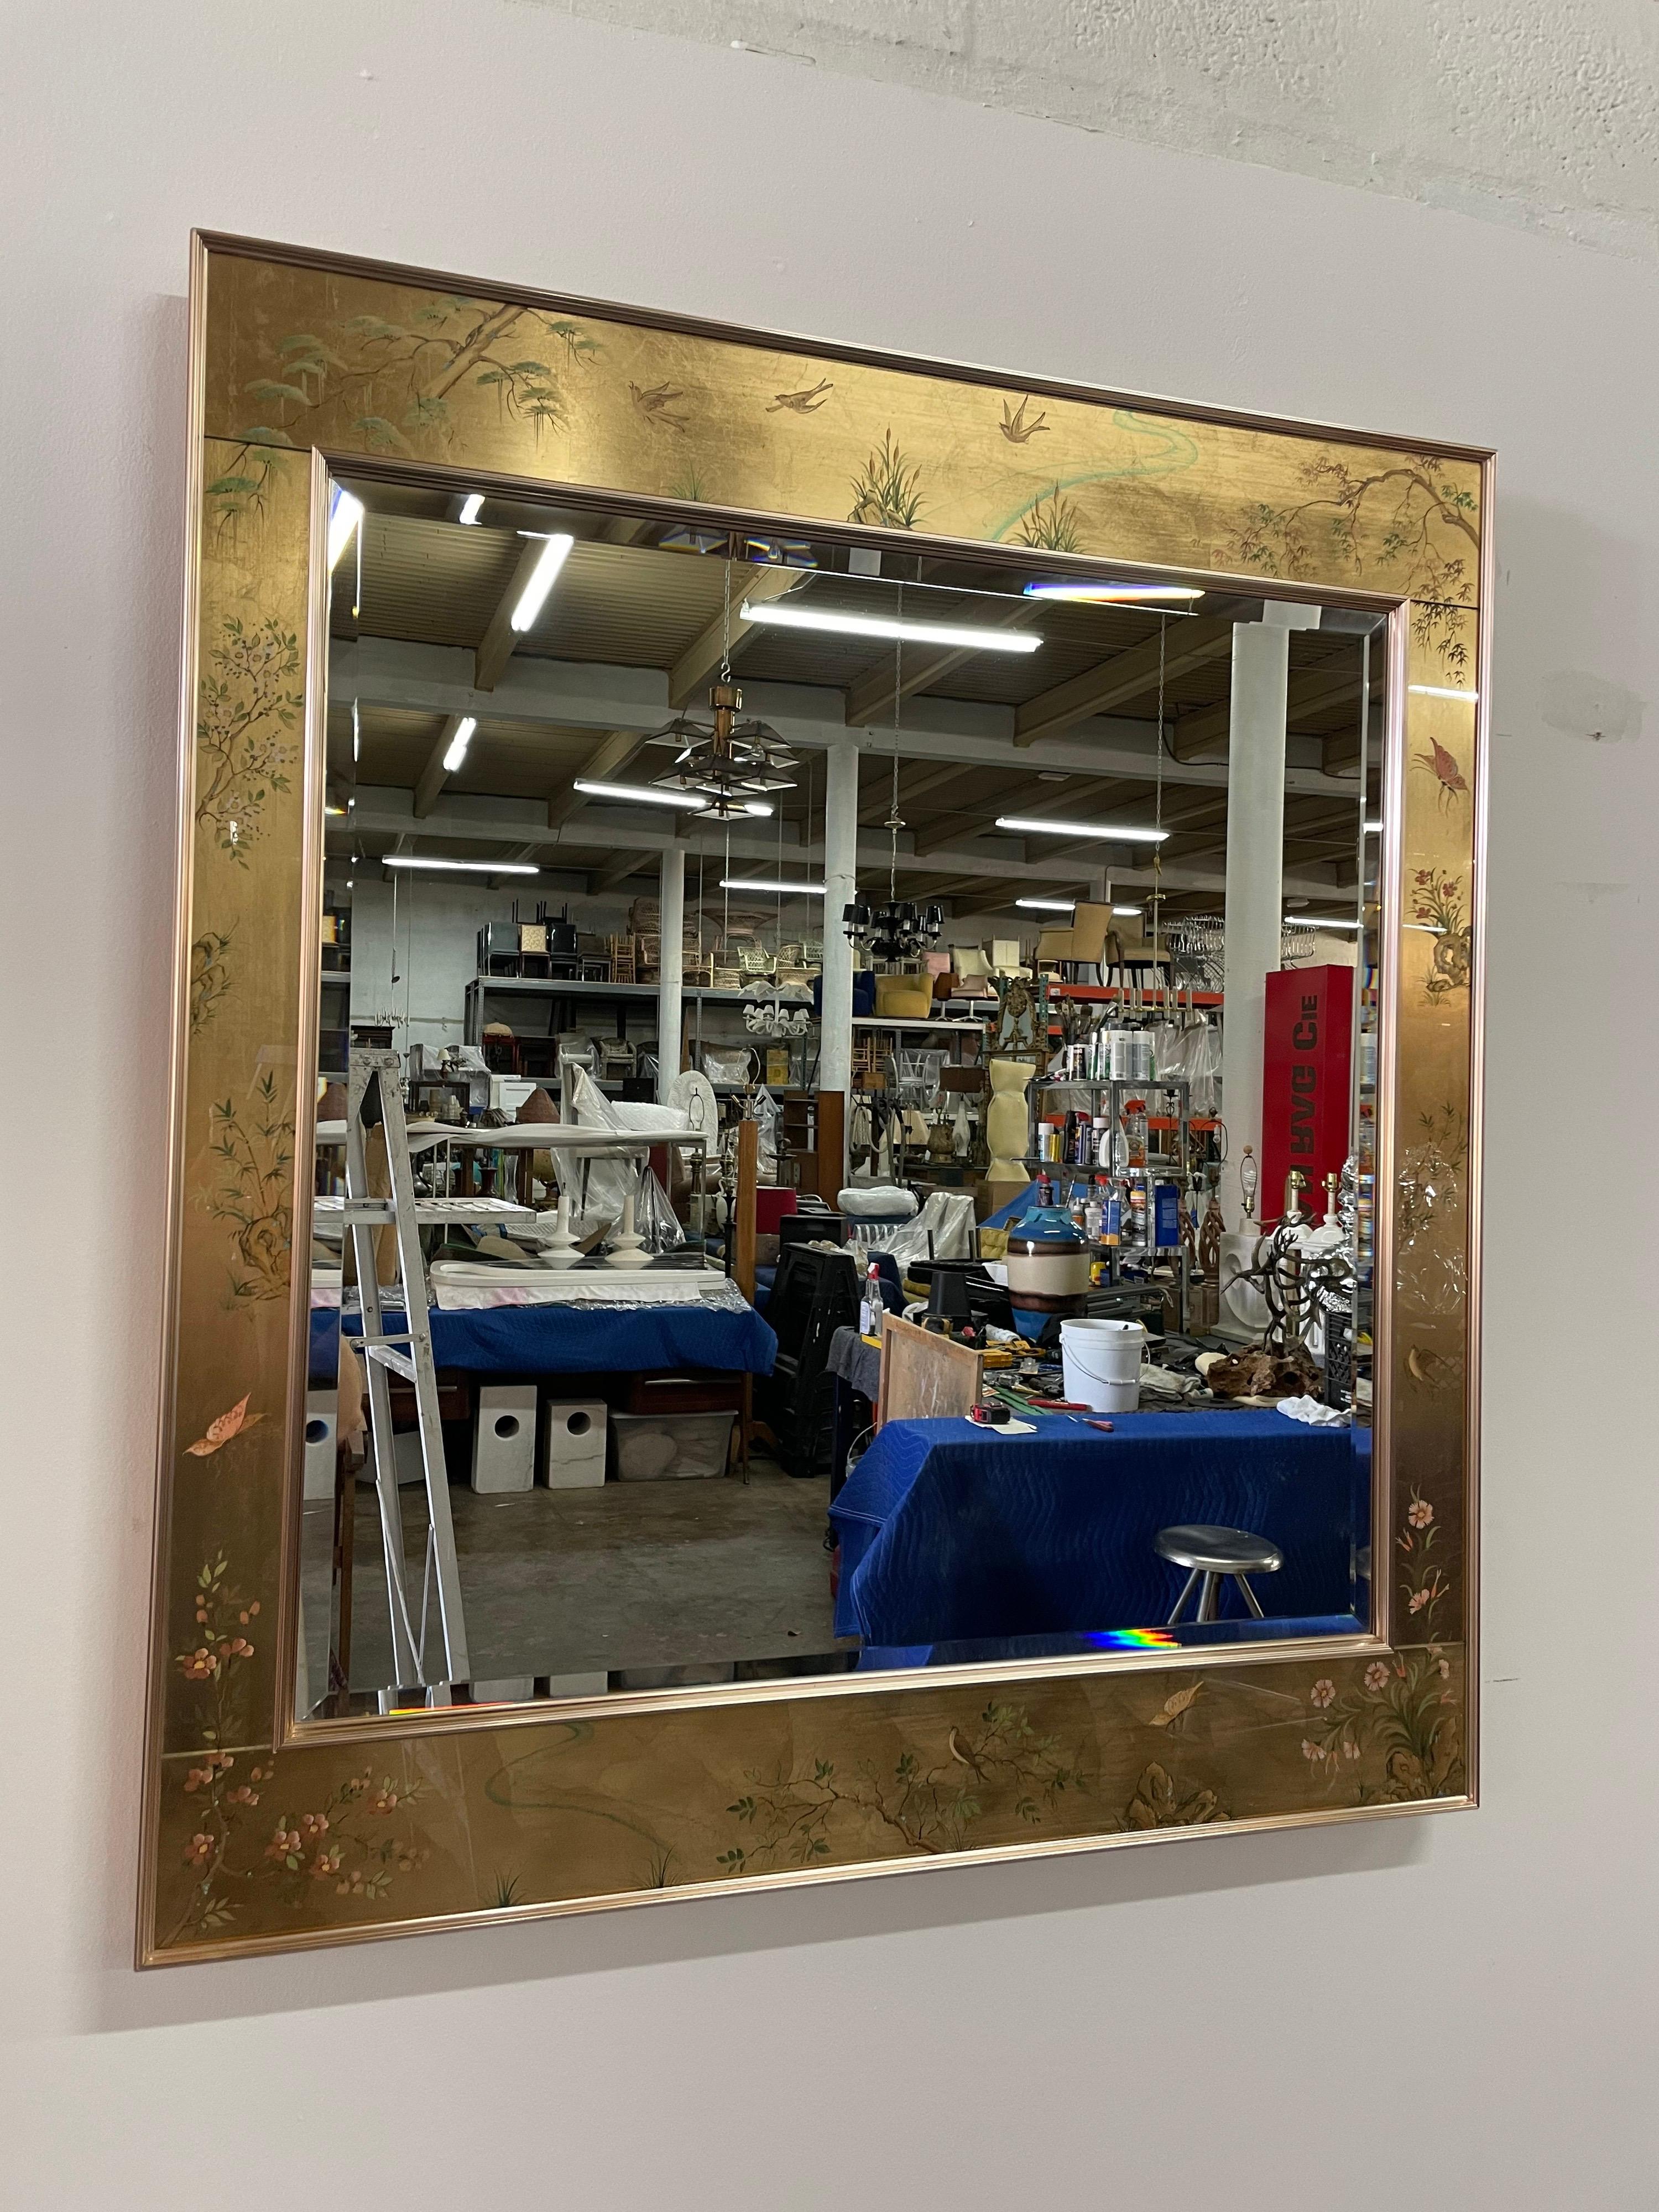 This SIGNED beautiful and elegant hand painted chinoiserie reverse painted and gold leaf framed beveled mirror, Signed to bottom (K, Widing). The gold aluminum frame surrounds the beveled mirror and the decorative band. This is the largest in this